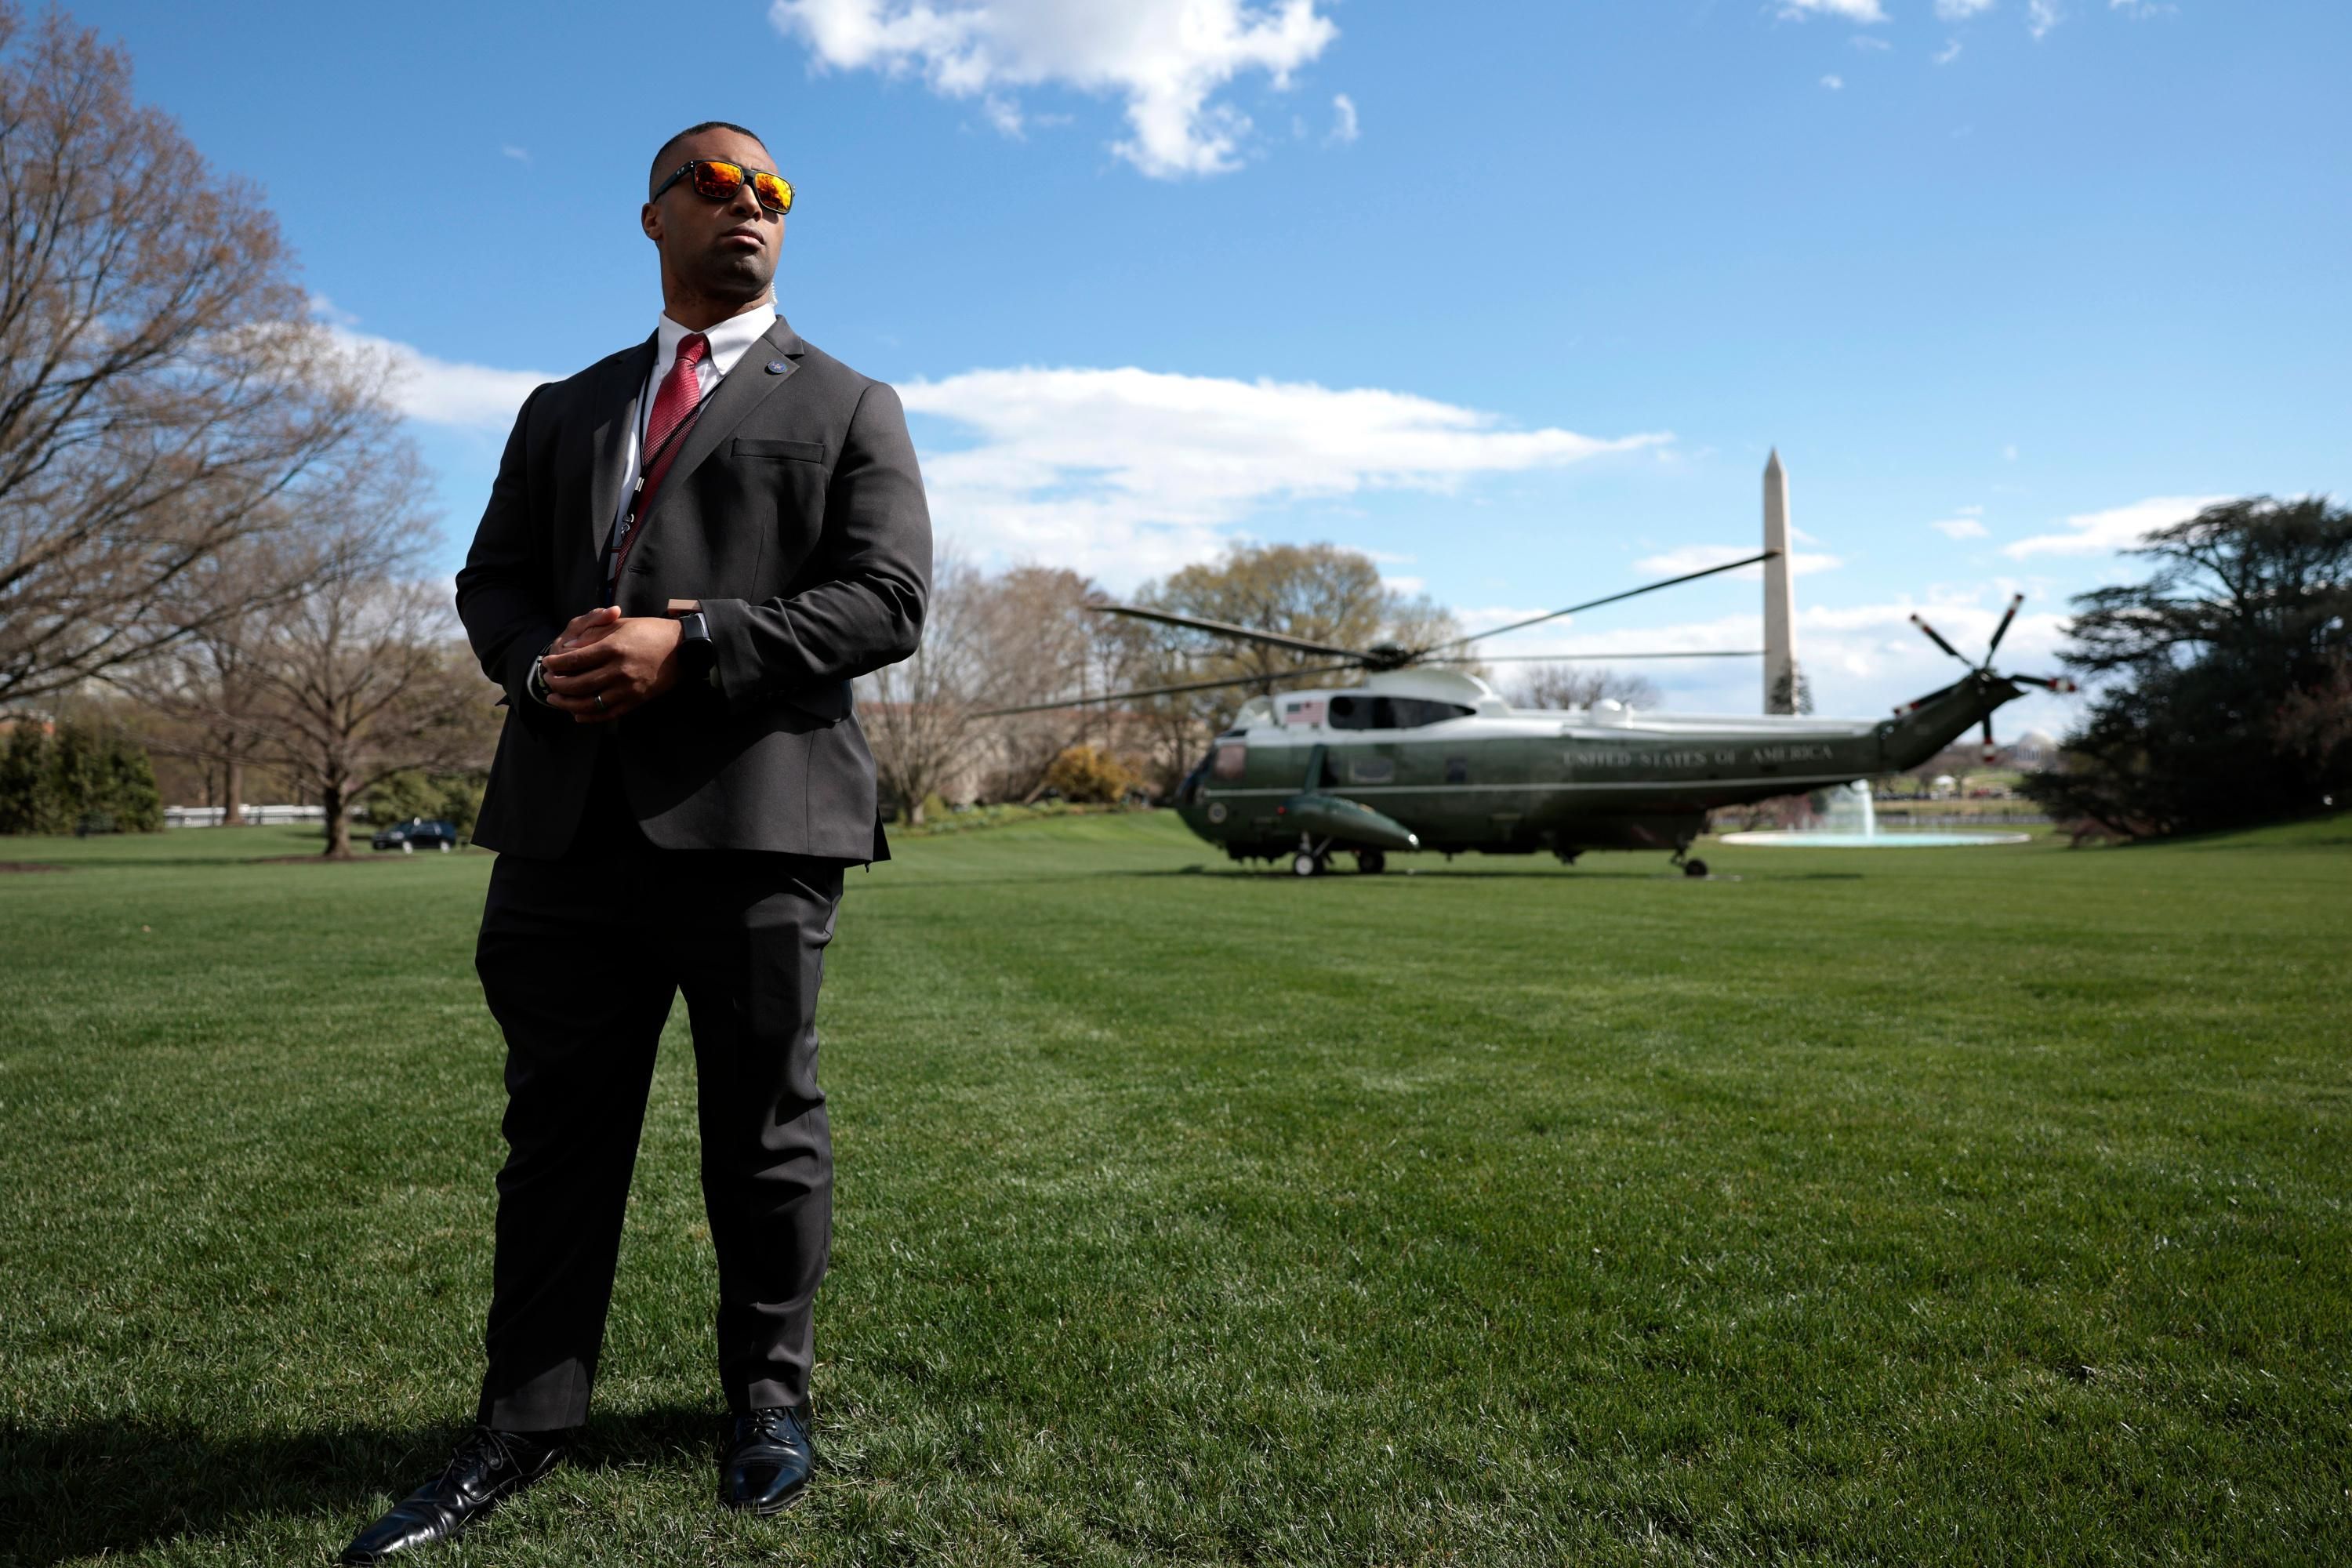 A Secret Service Agent looks on as Marine One, carrying U.S. President Joe Biden lifts off from the South Lawn of the White House on April 01, 2022 in Washington, DC. President Biden is spending the weekend at his home in Wilmington, Delaware. (Photo by Anna Moneymaker/Getty Images)